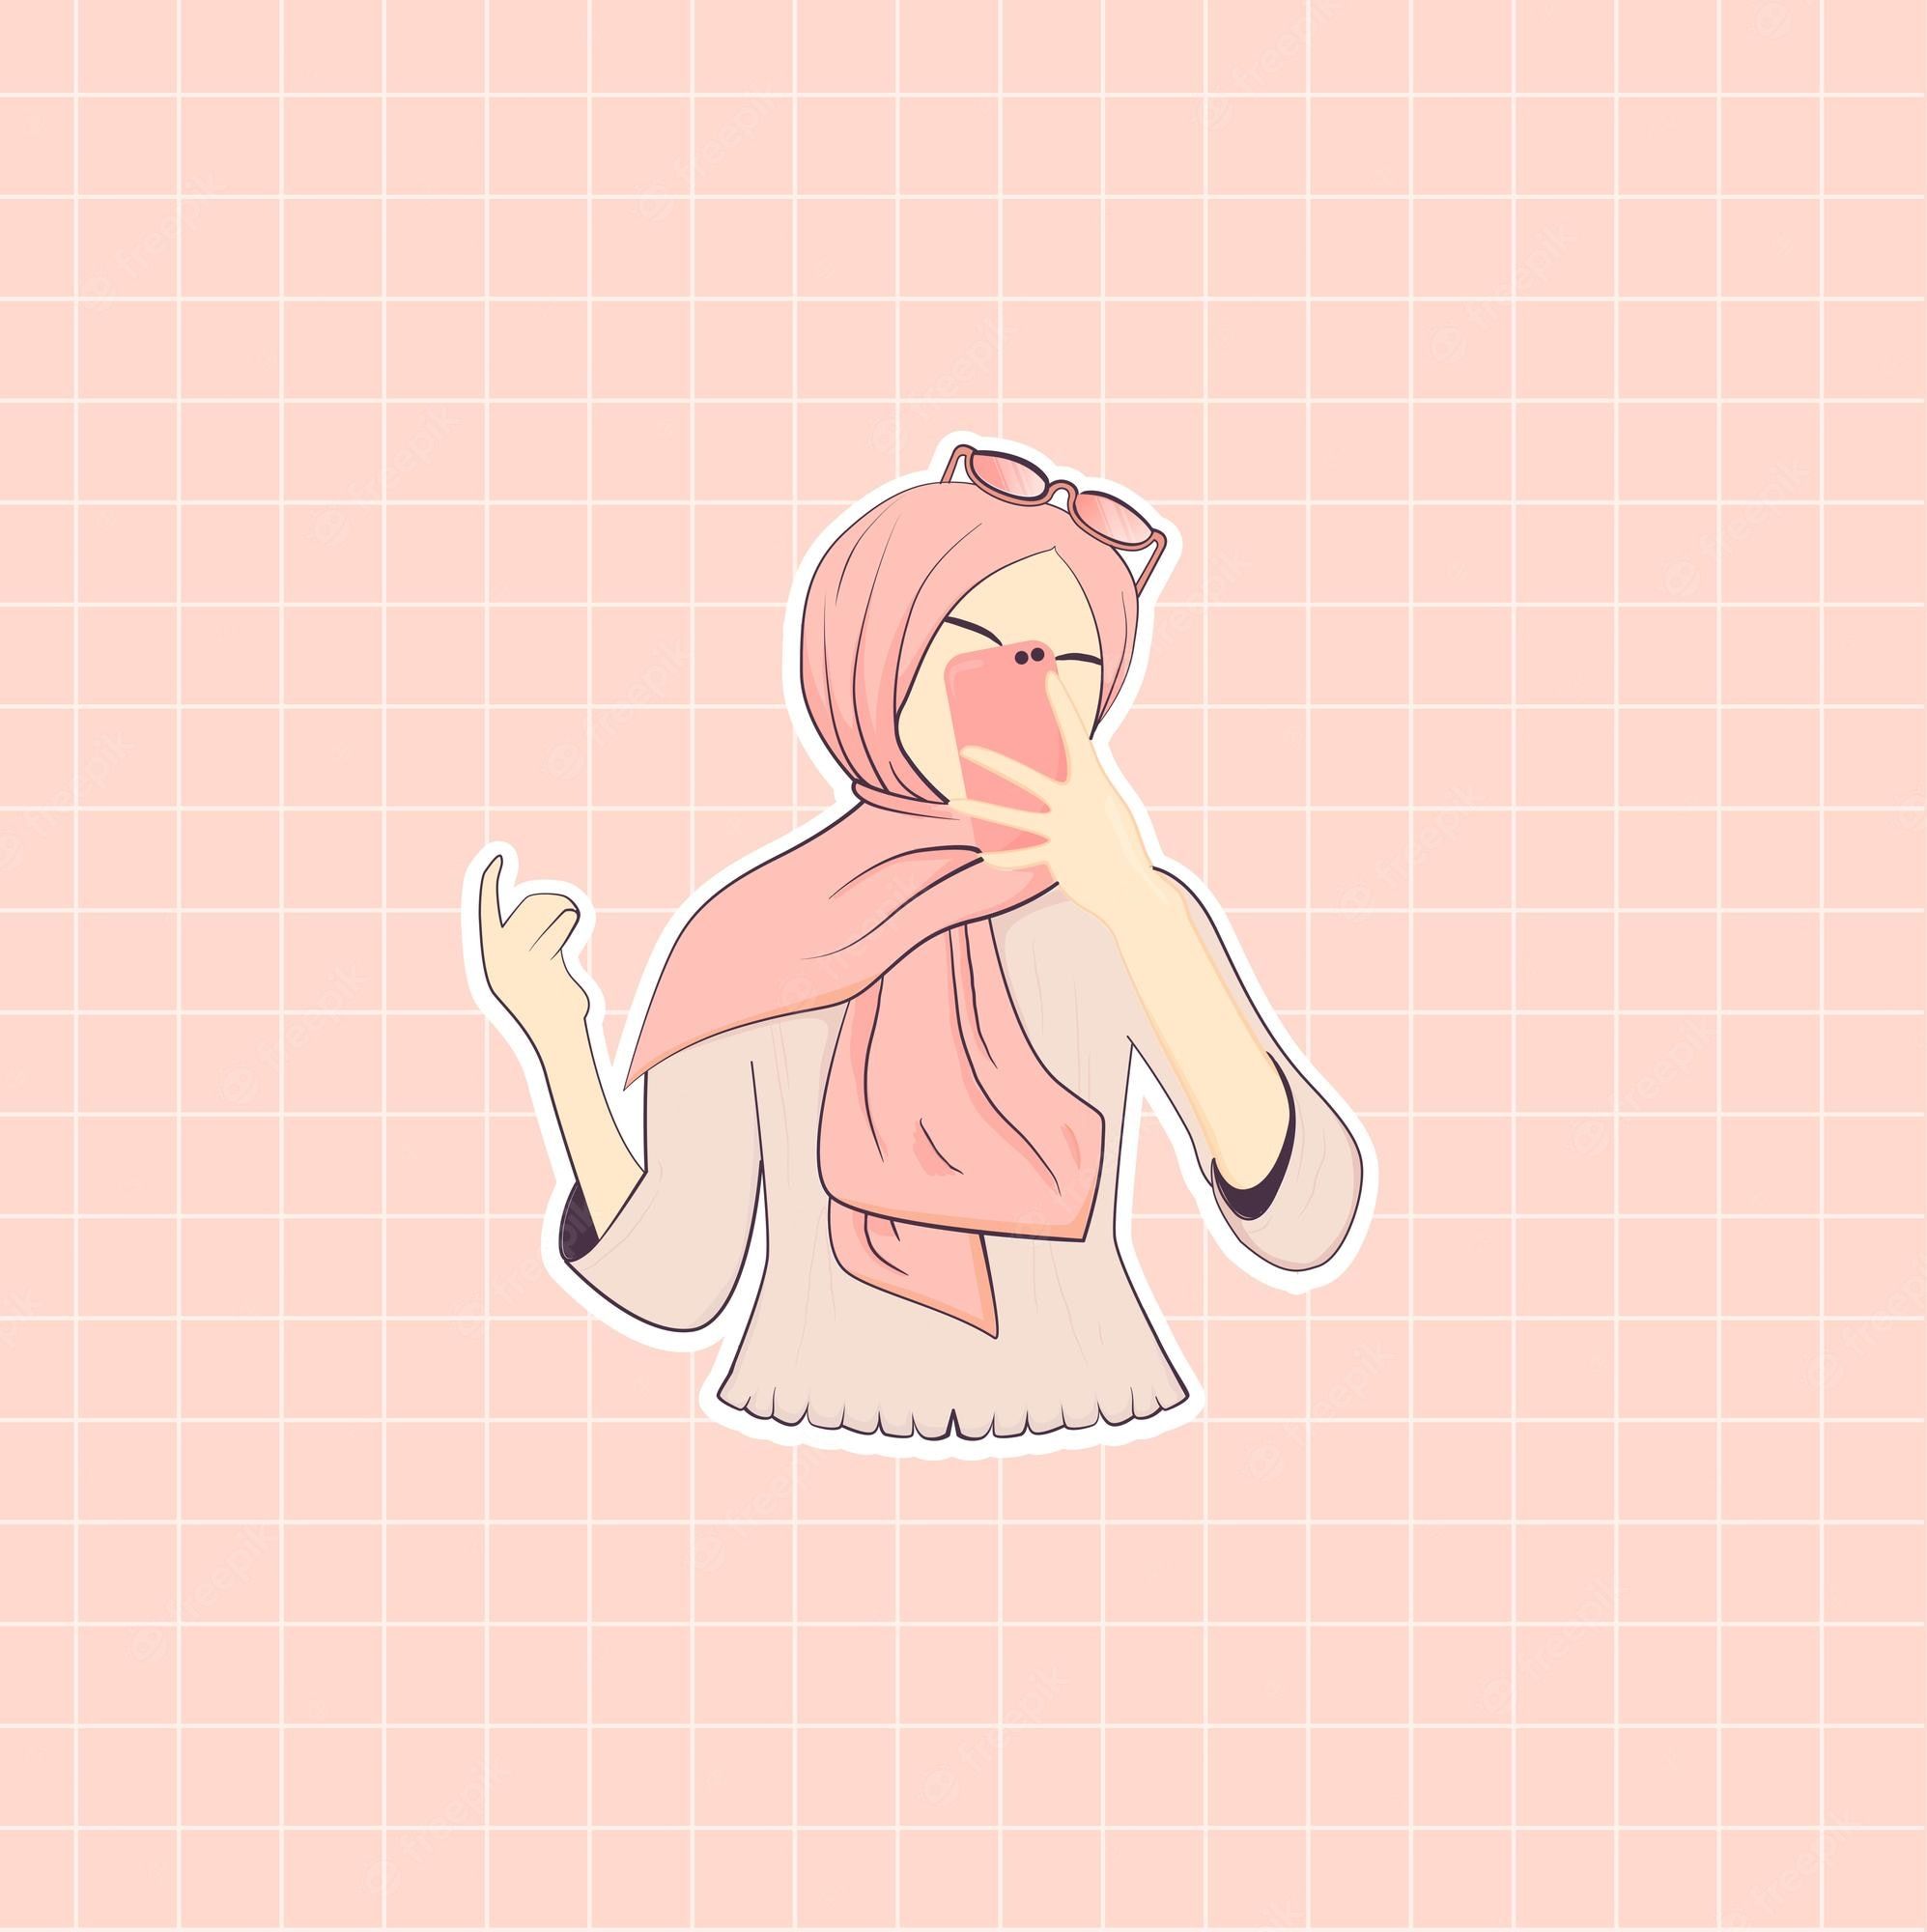 A sticker of a girl wearing a hijab and a cat ear headband, holding a phone up to her face. - Profile picture